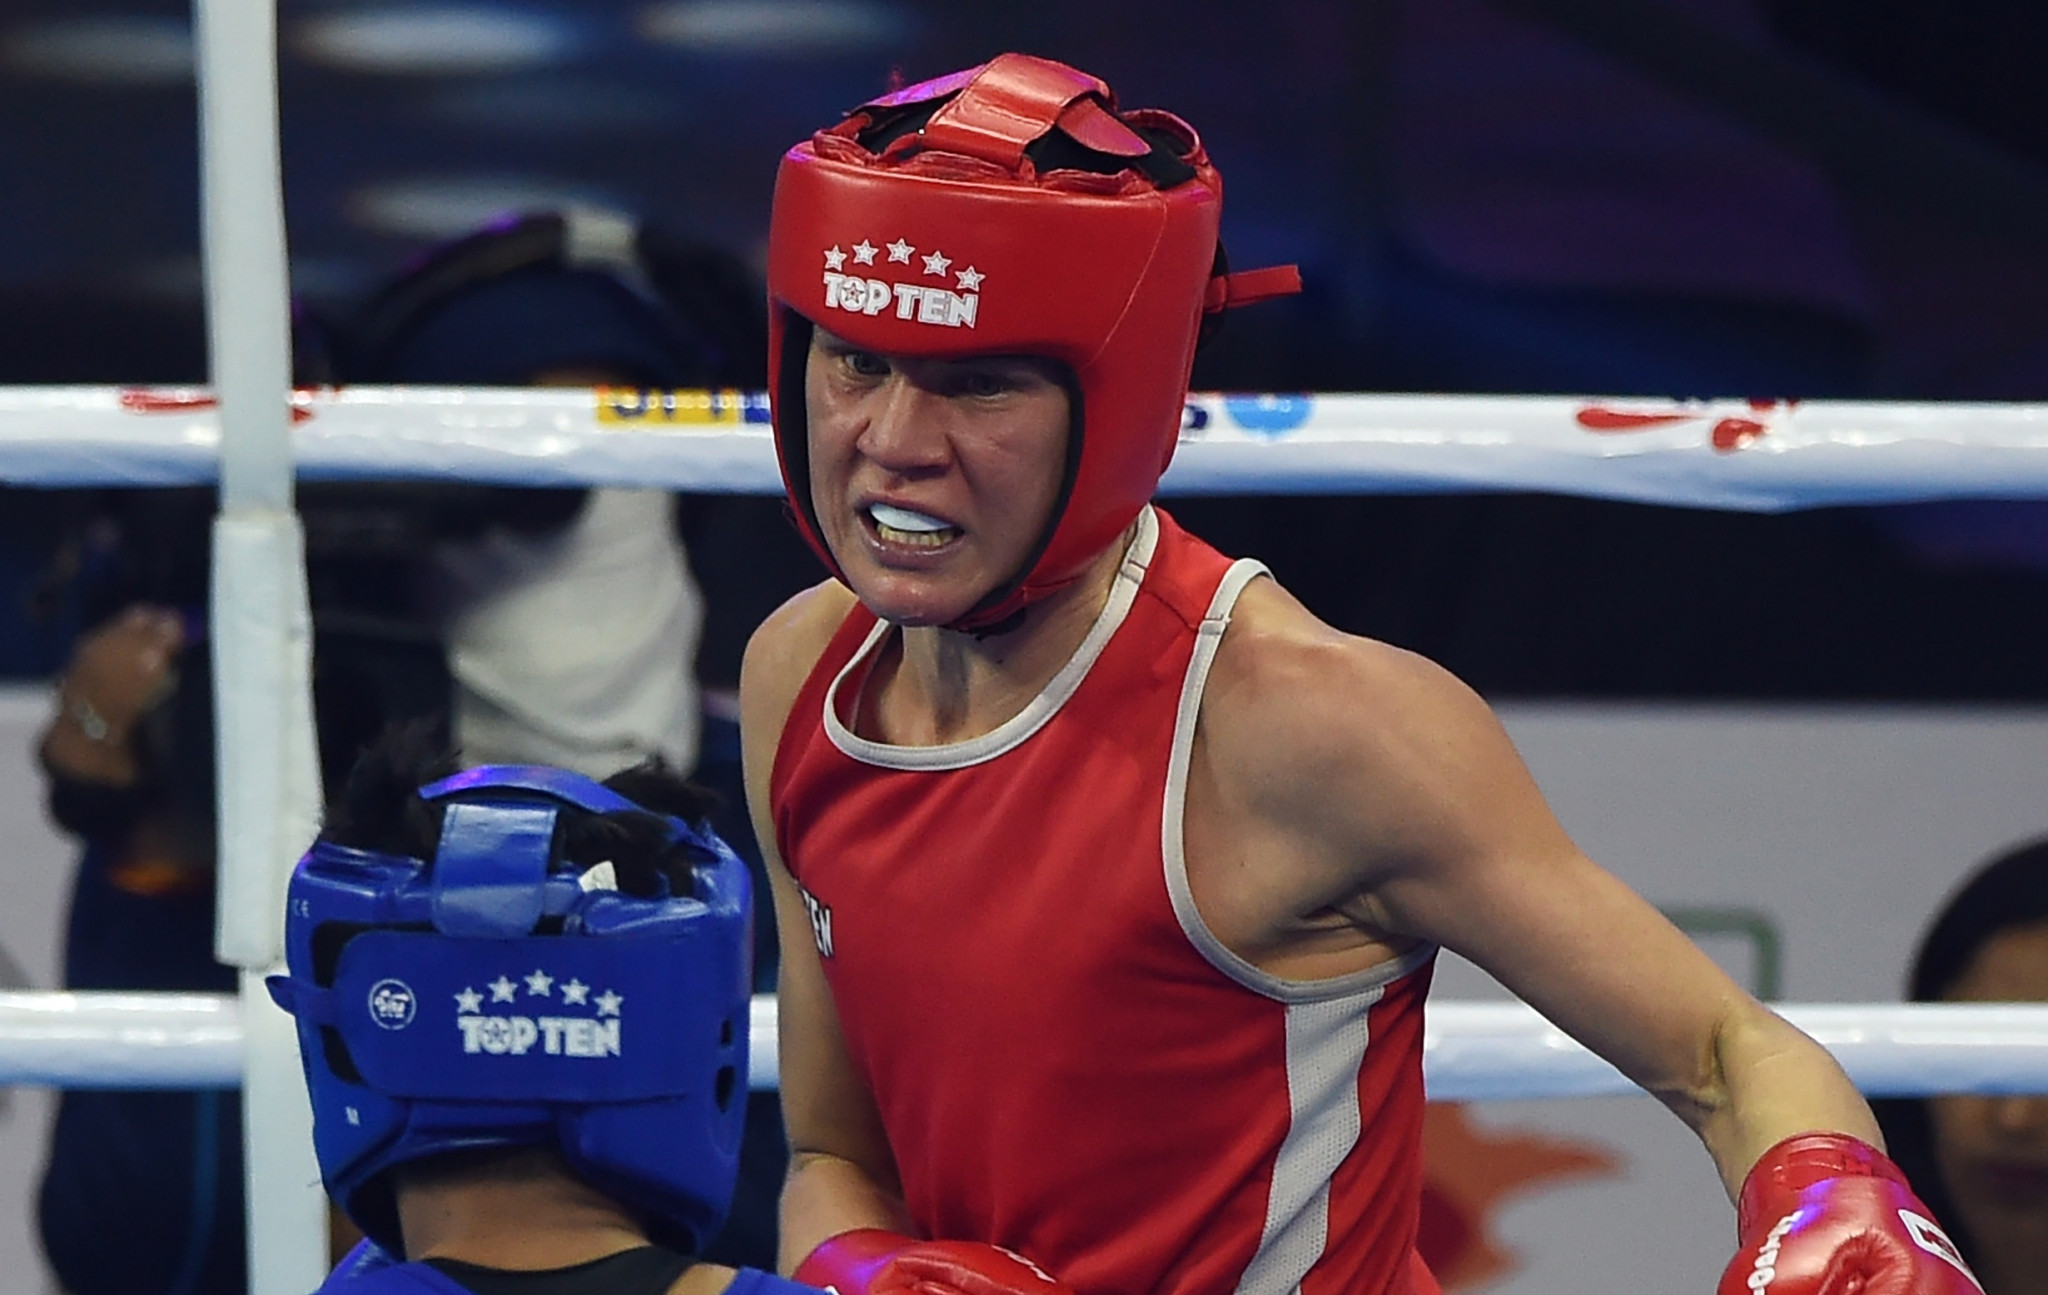 Potkonen impresses at AIBA Women's World Boxing Championships with big-hitters absent